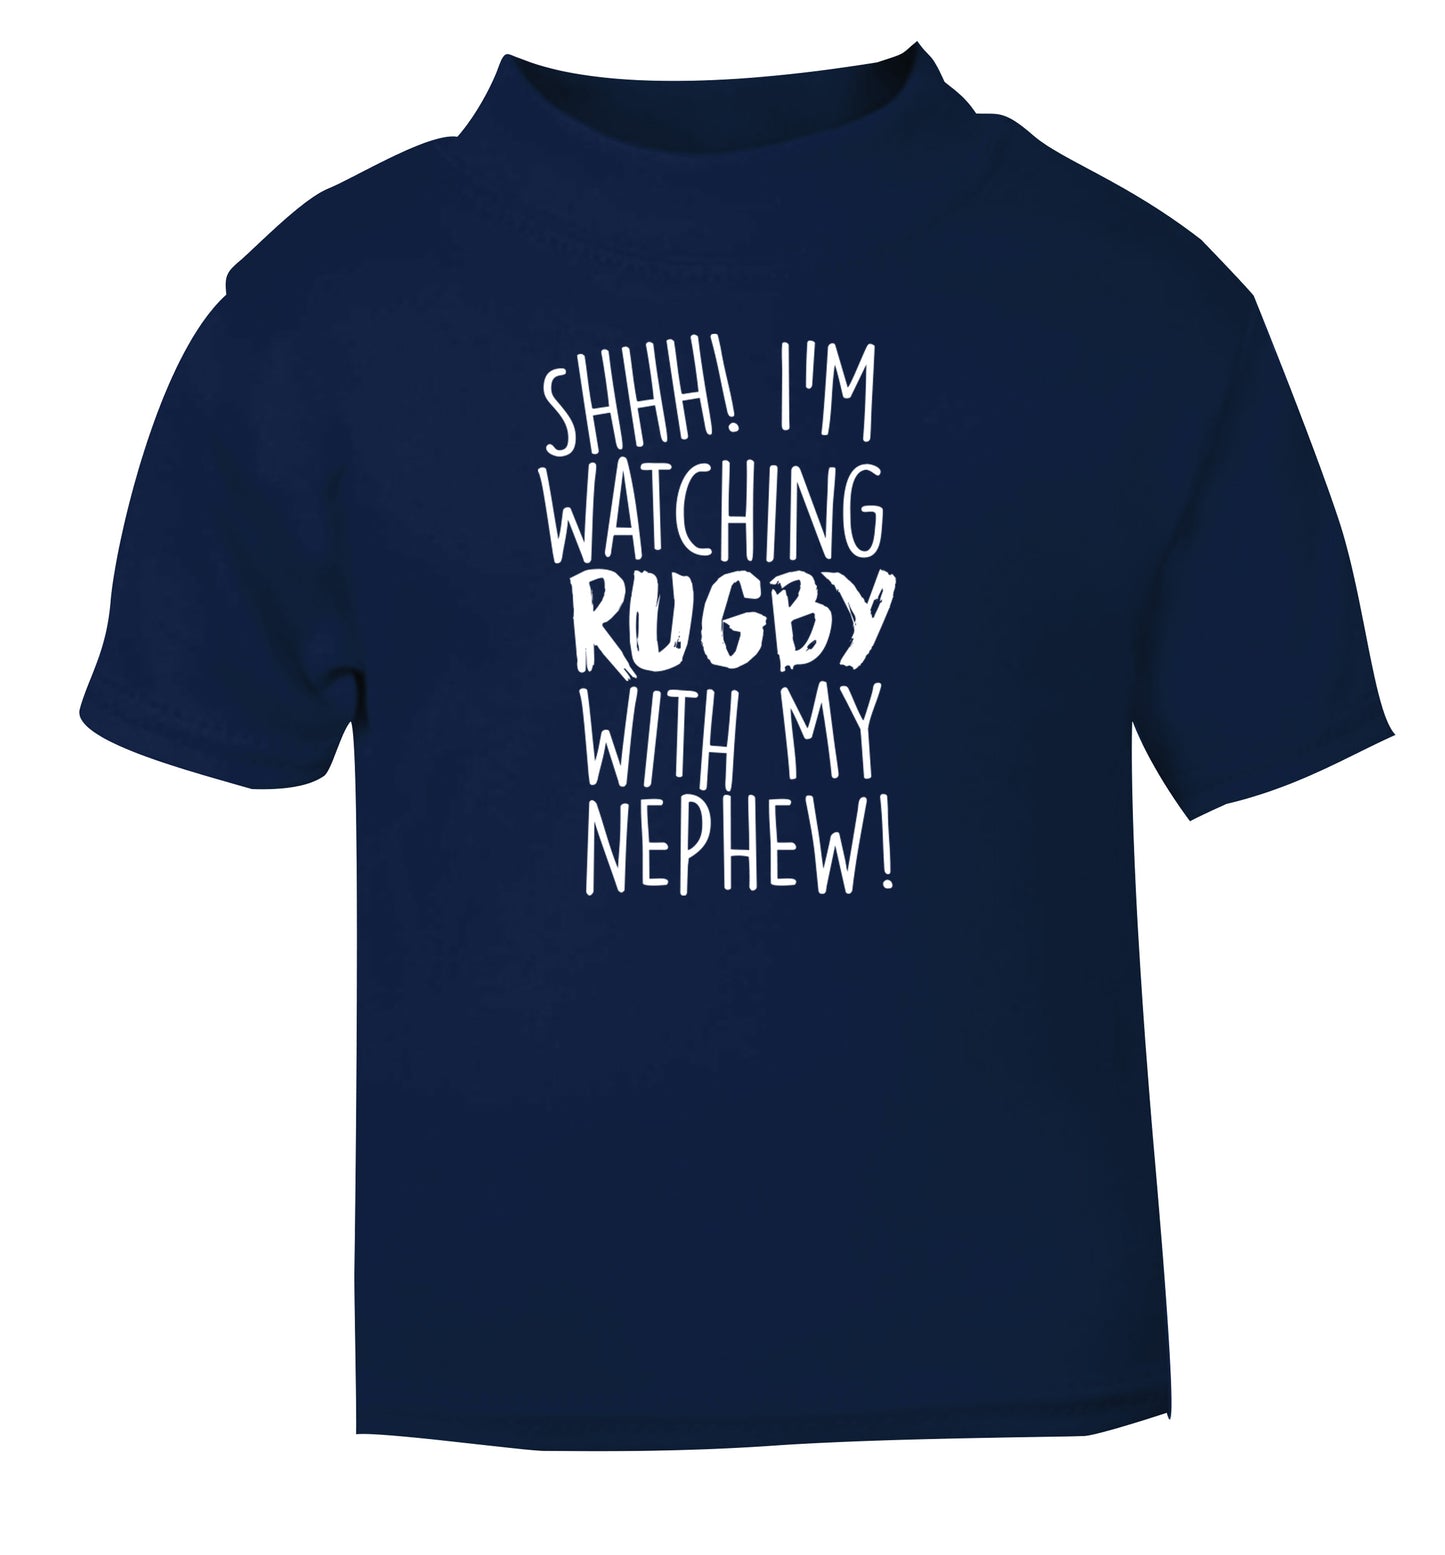 Shh.. I'm watching rugby with my nephew navy Baby Toddler Tshirt 2 Years